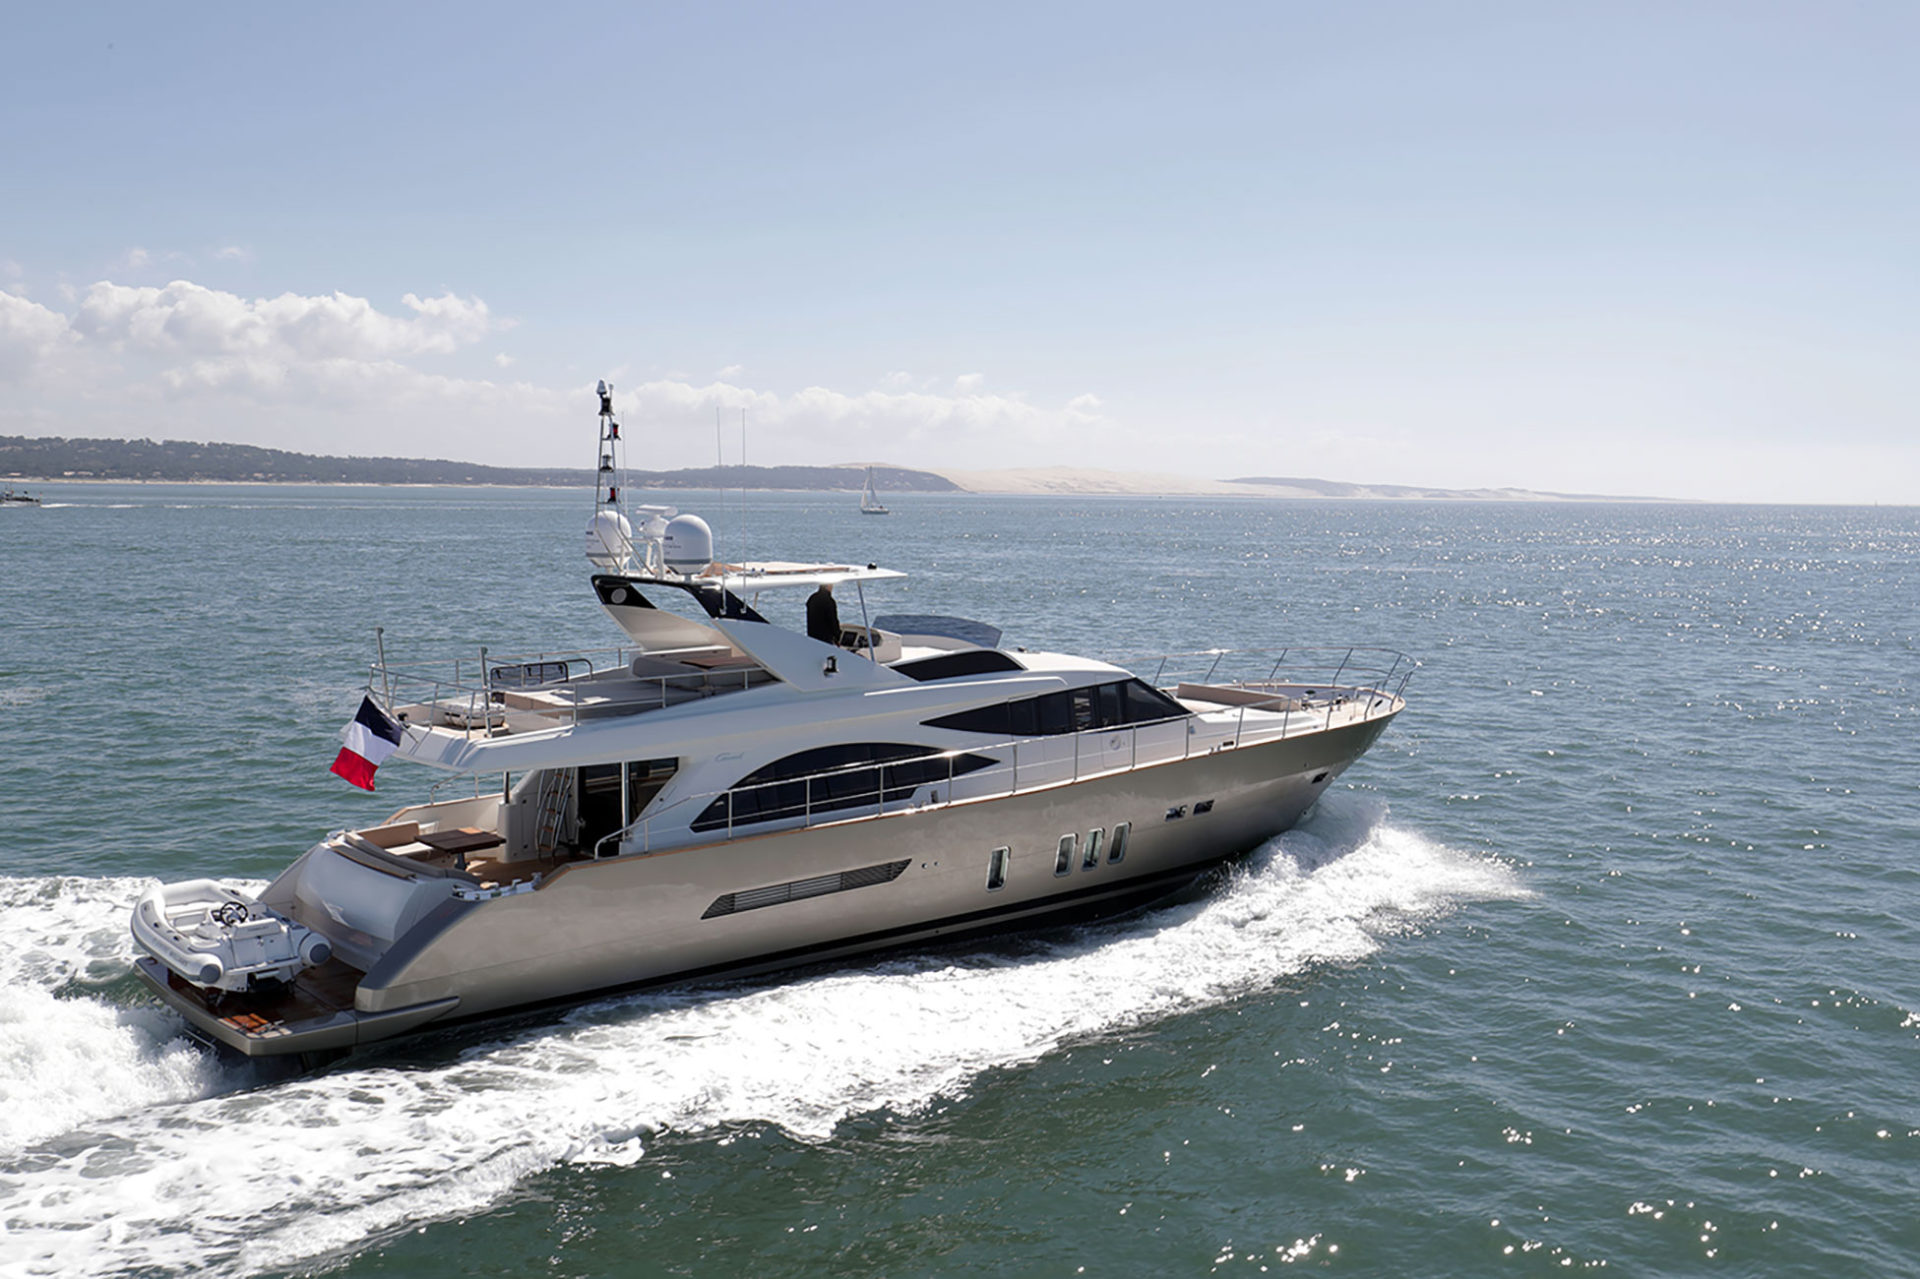 CJR equipped motor yacht